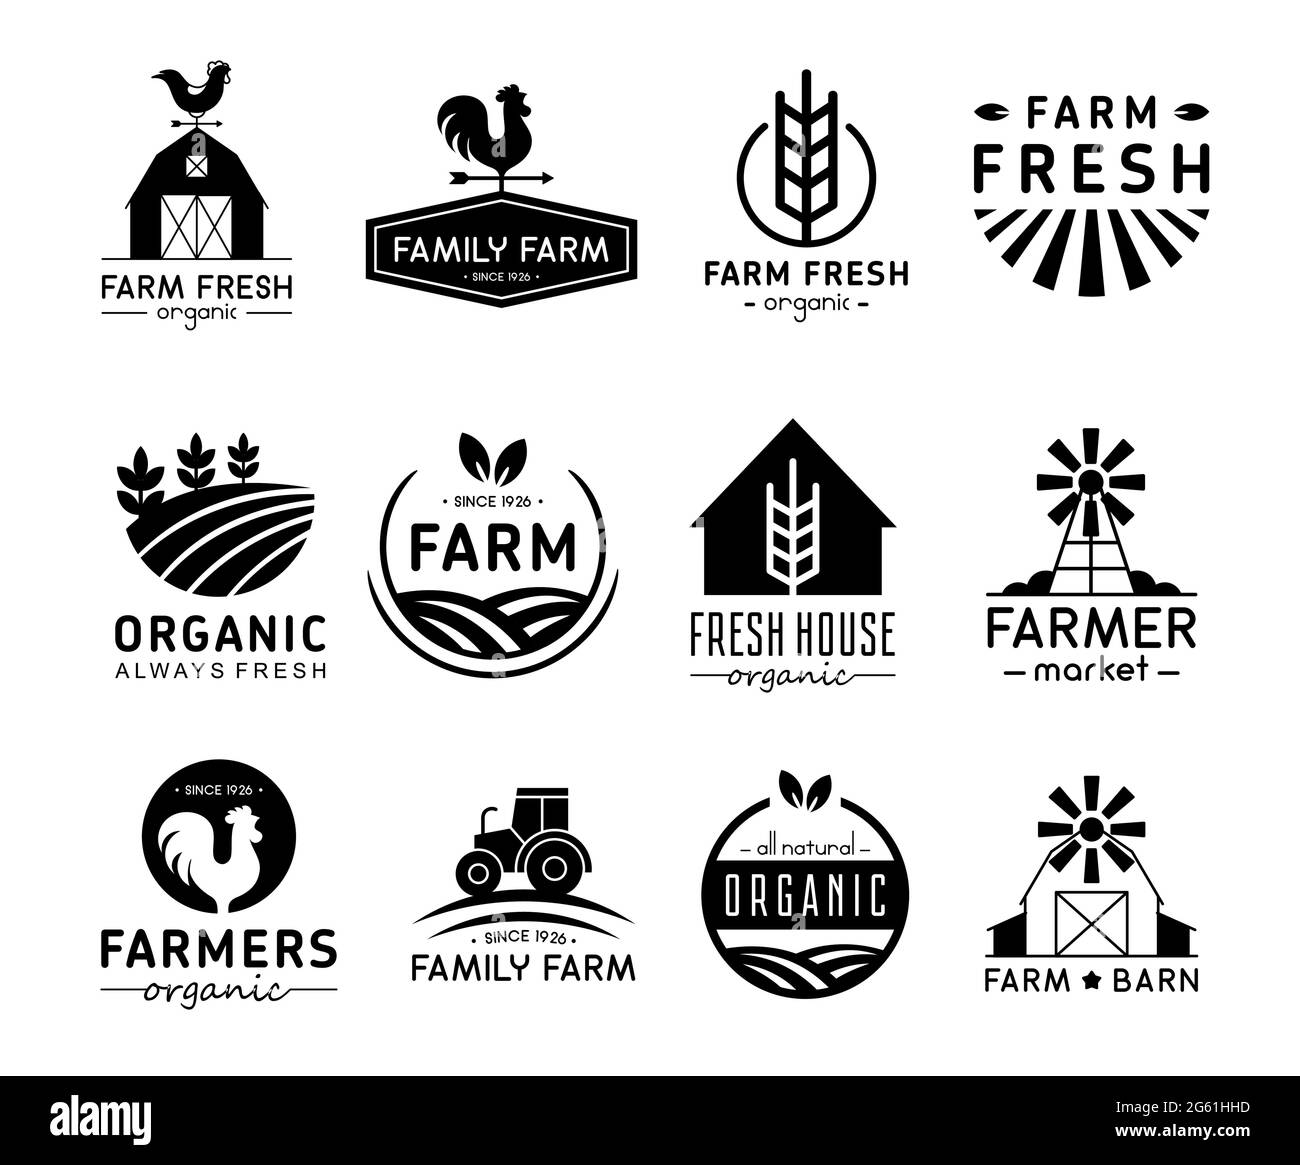 https://c8.alamy.com/comp/2G61HHD/vector-illustration-set-of-organic-products-logos-and-labels-farm-logos-fresh-and-healthy-food-logotypes-collection-isolated-on-white-background-2G61HHD.jpg